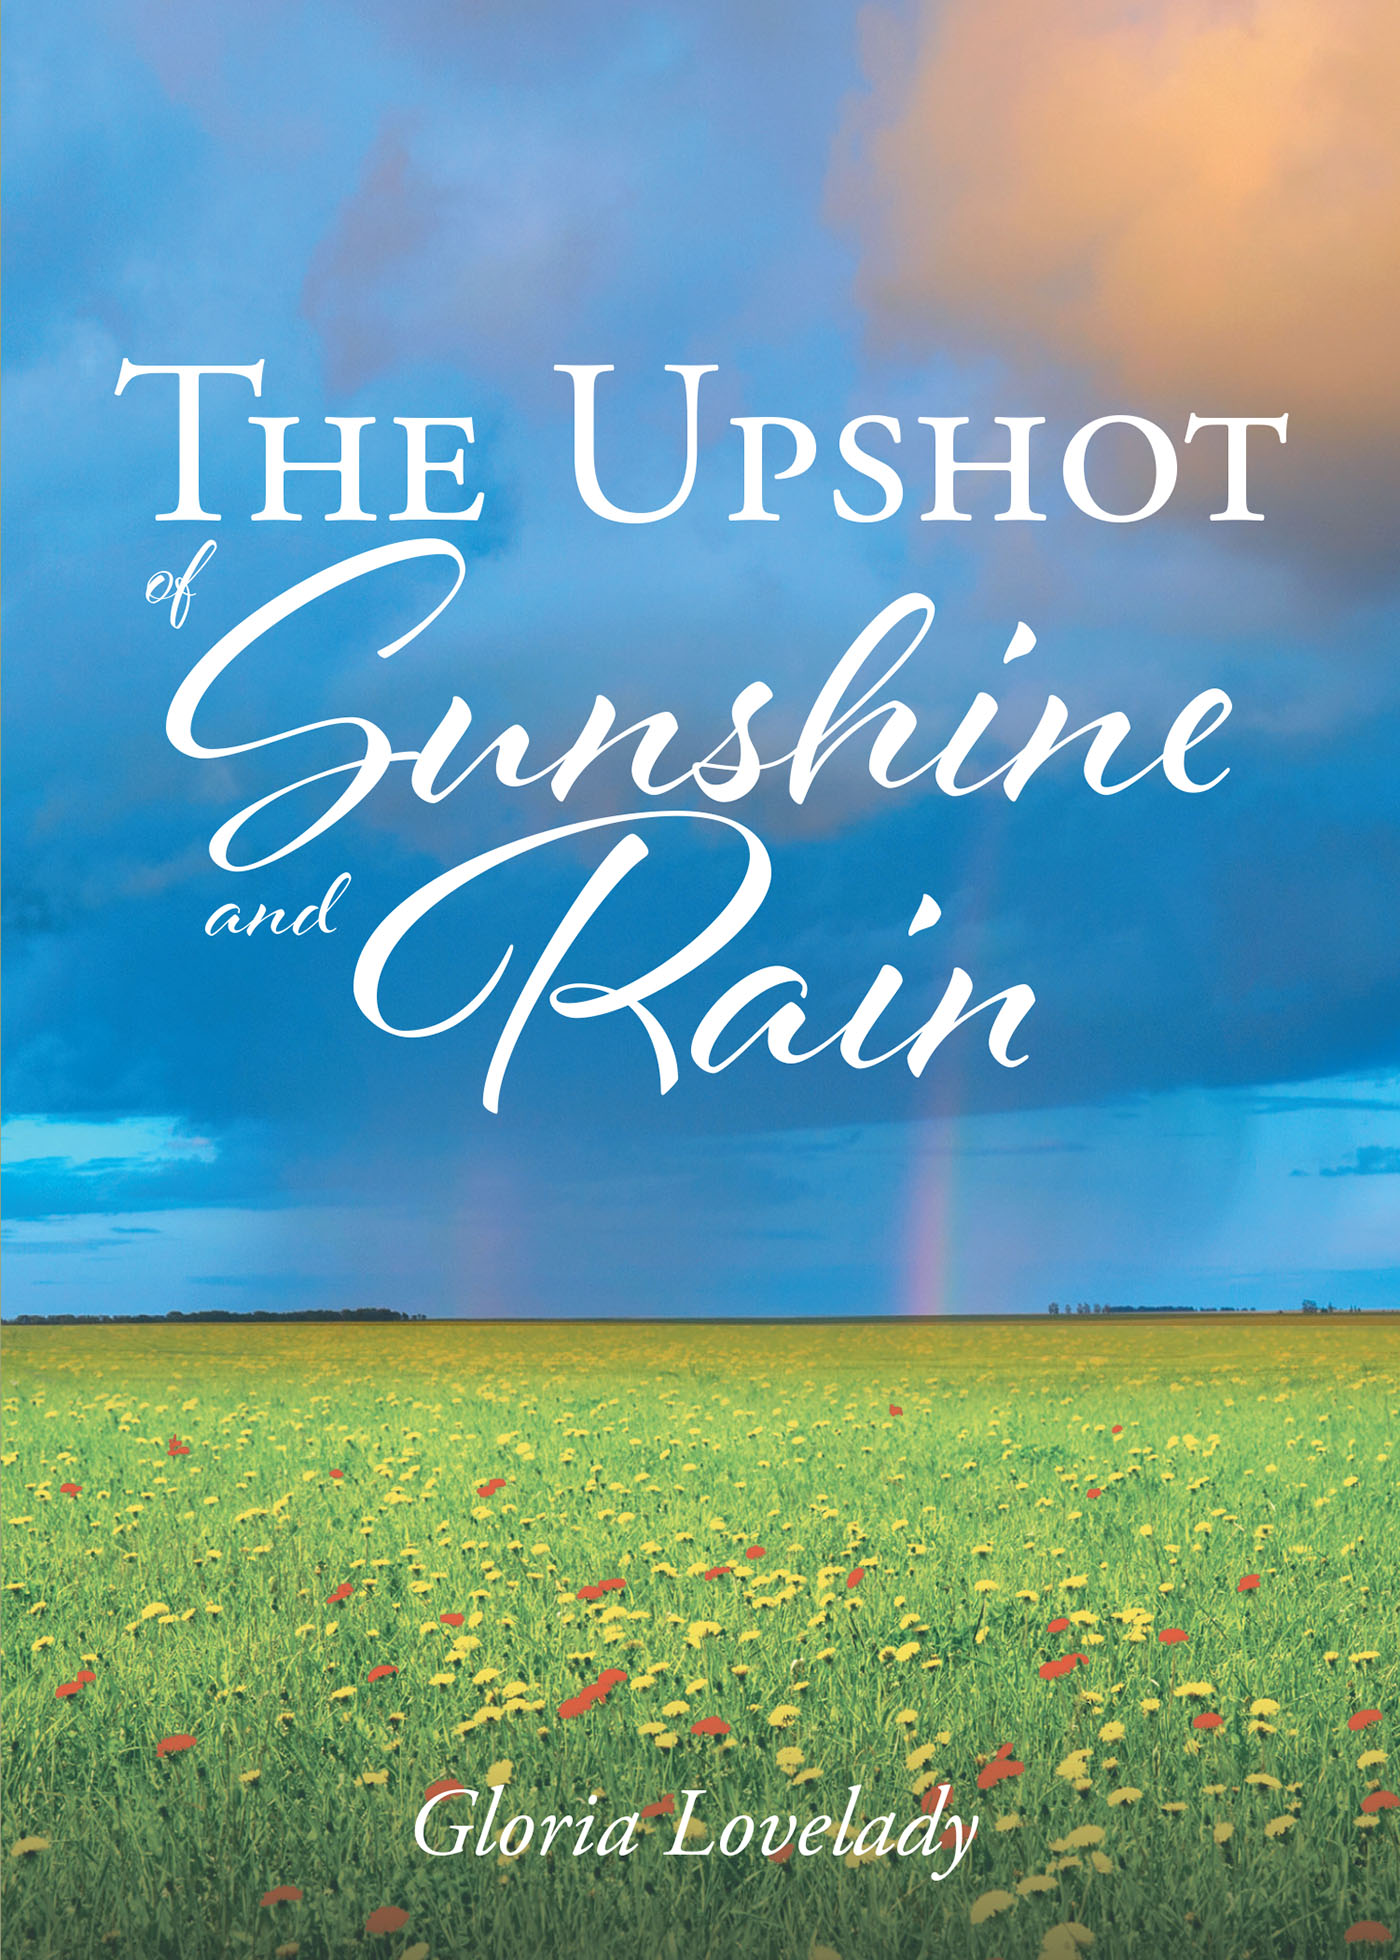 Gloria Lovelady’s Newly Released "The Upshot of Sunshine and Rain" is an Engaging Collection of Inspirationally Driven Poems